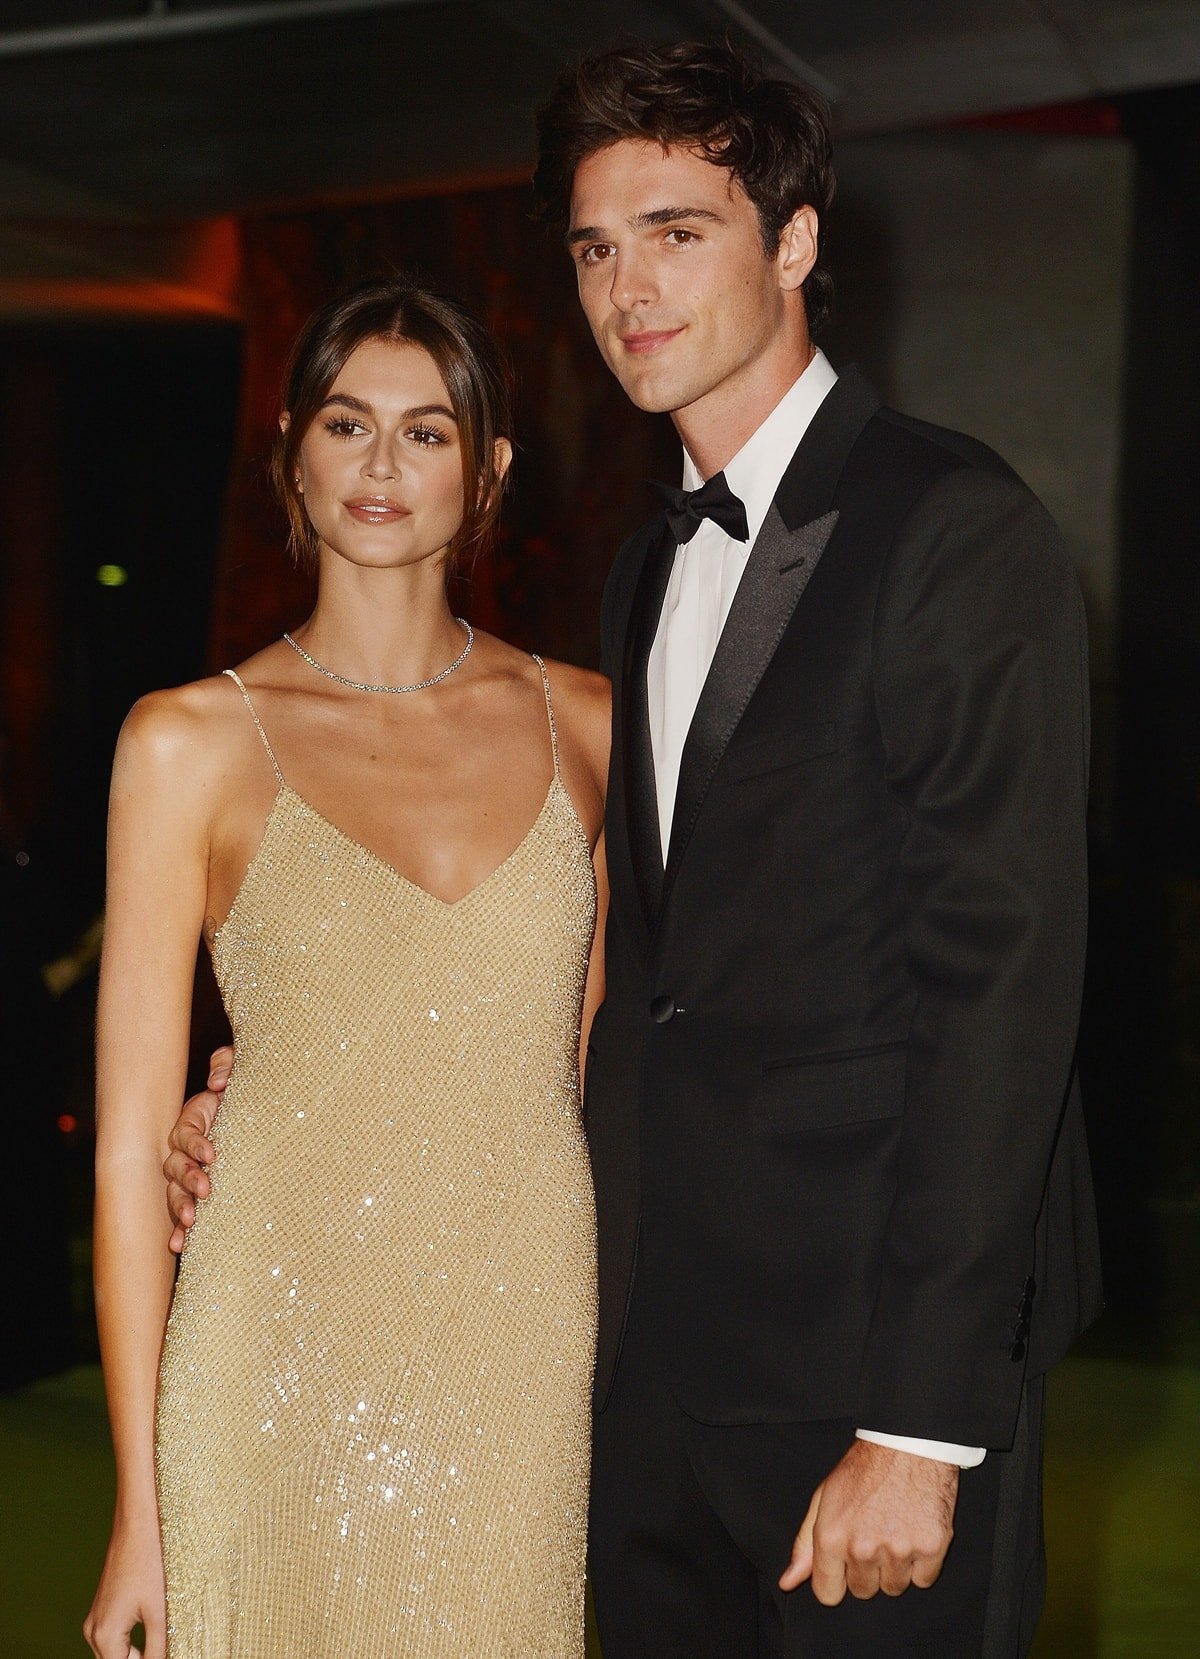 During their relationship in 2020-2021, Kaia Gerber, with a height of 5 feet 8 ½ inches (174 cm), was notably shorter than Jacob Elordi, who stood at 6 feet 5 inches (195.6 cm)